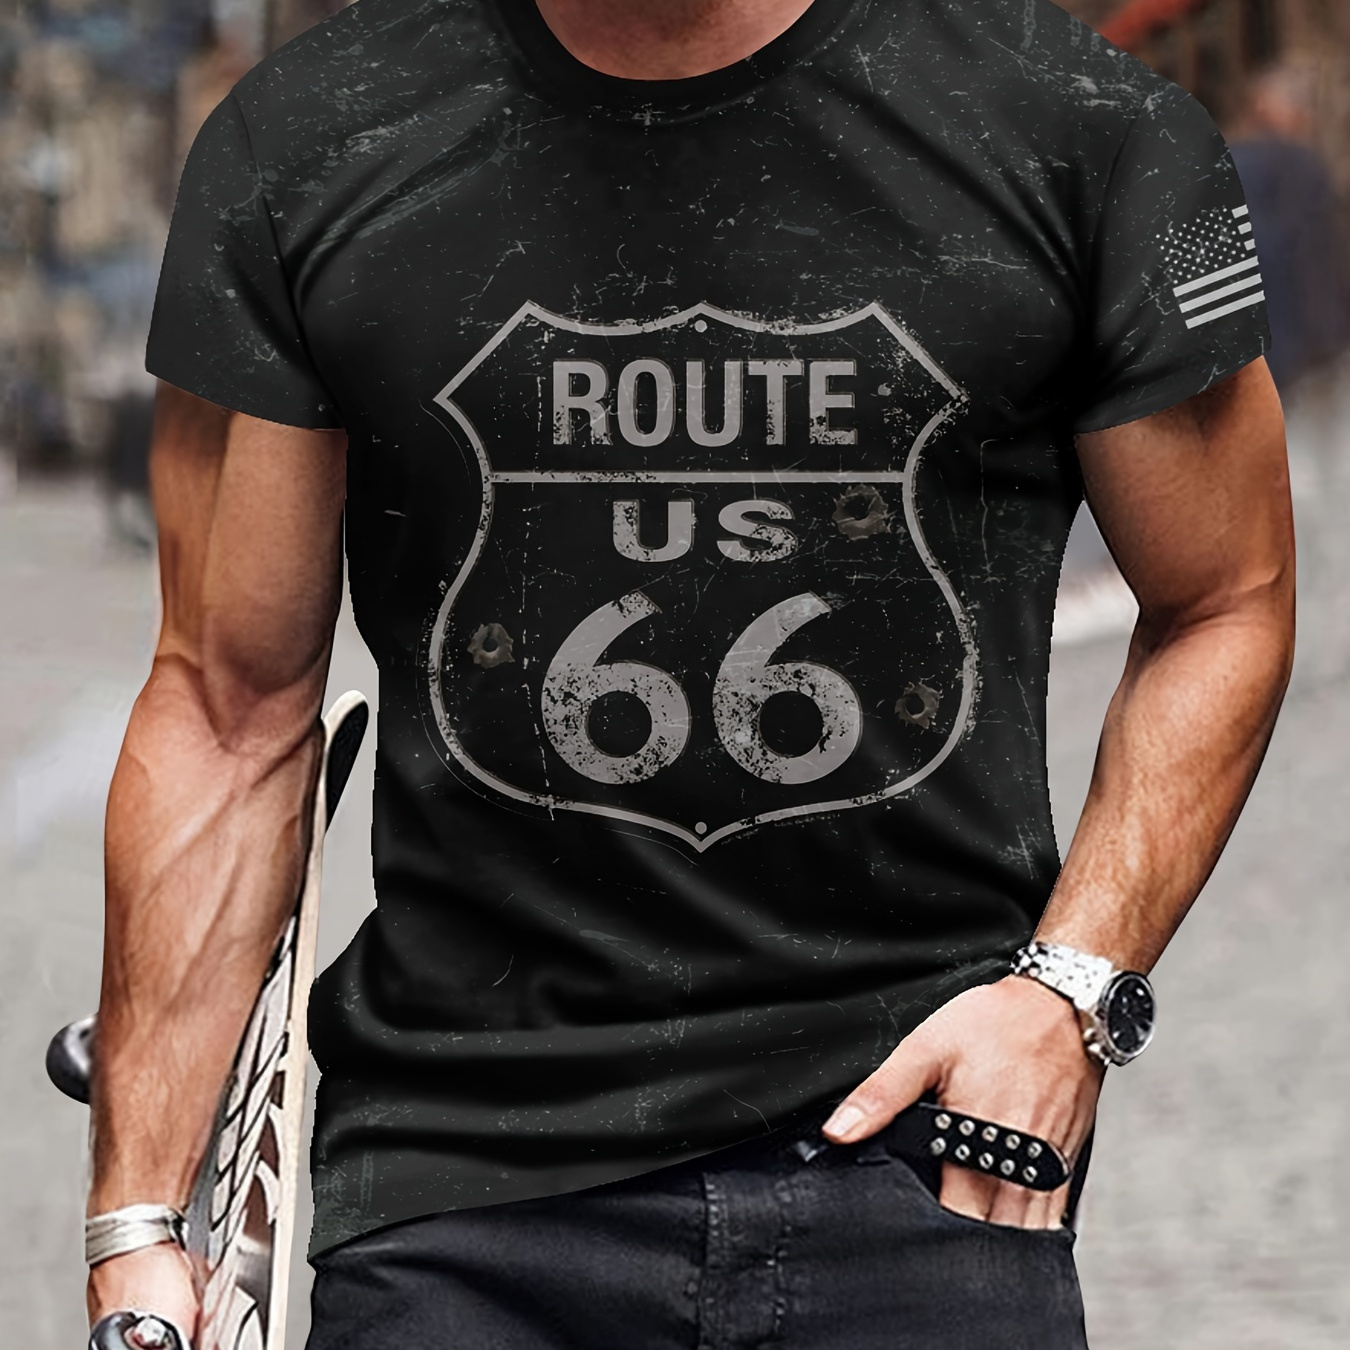 

Men's Route Us 66 Print T-shirt, Casual Short Sleeve Crew Neck Tee, Men's Clothing For Outdoor